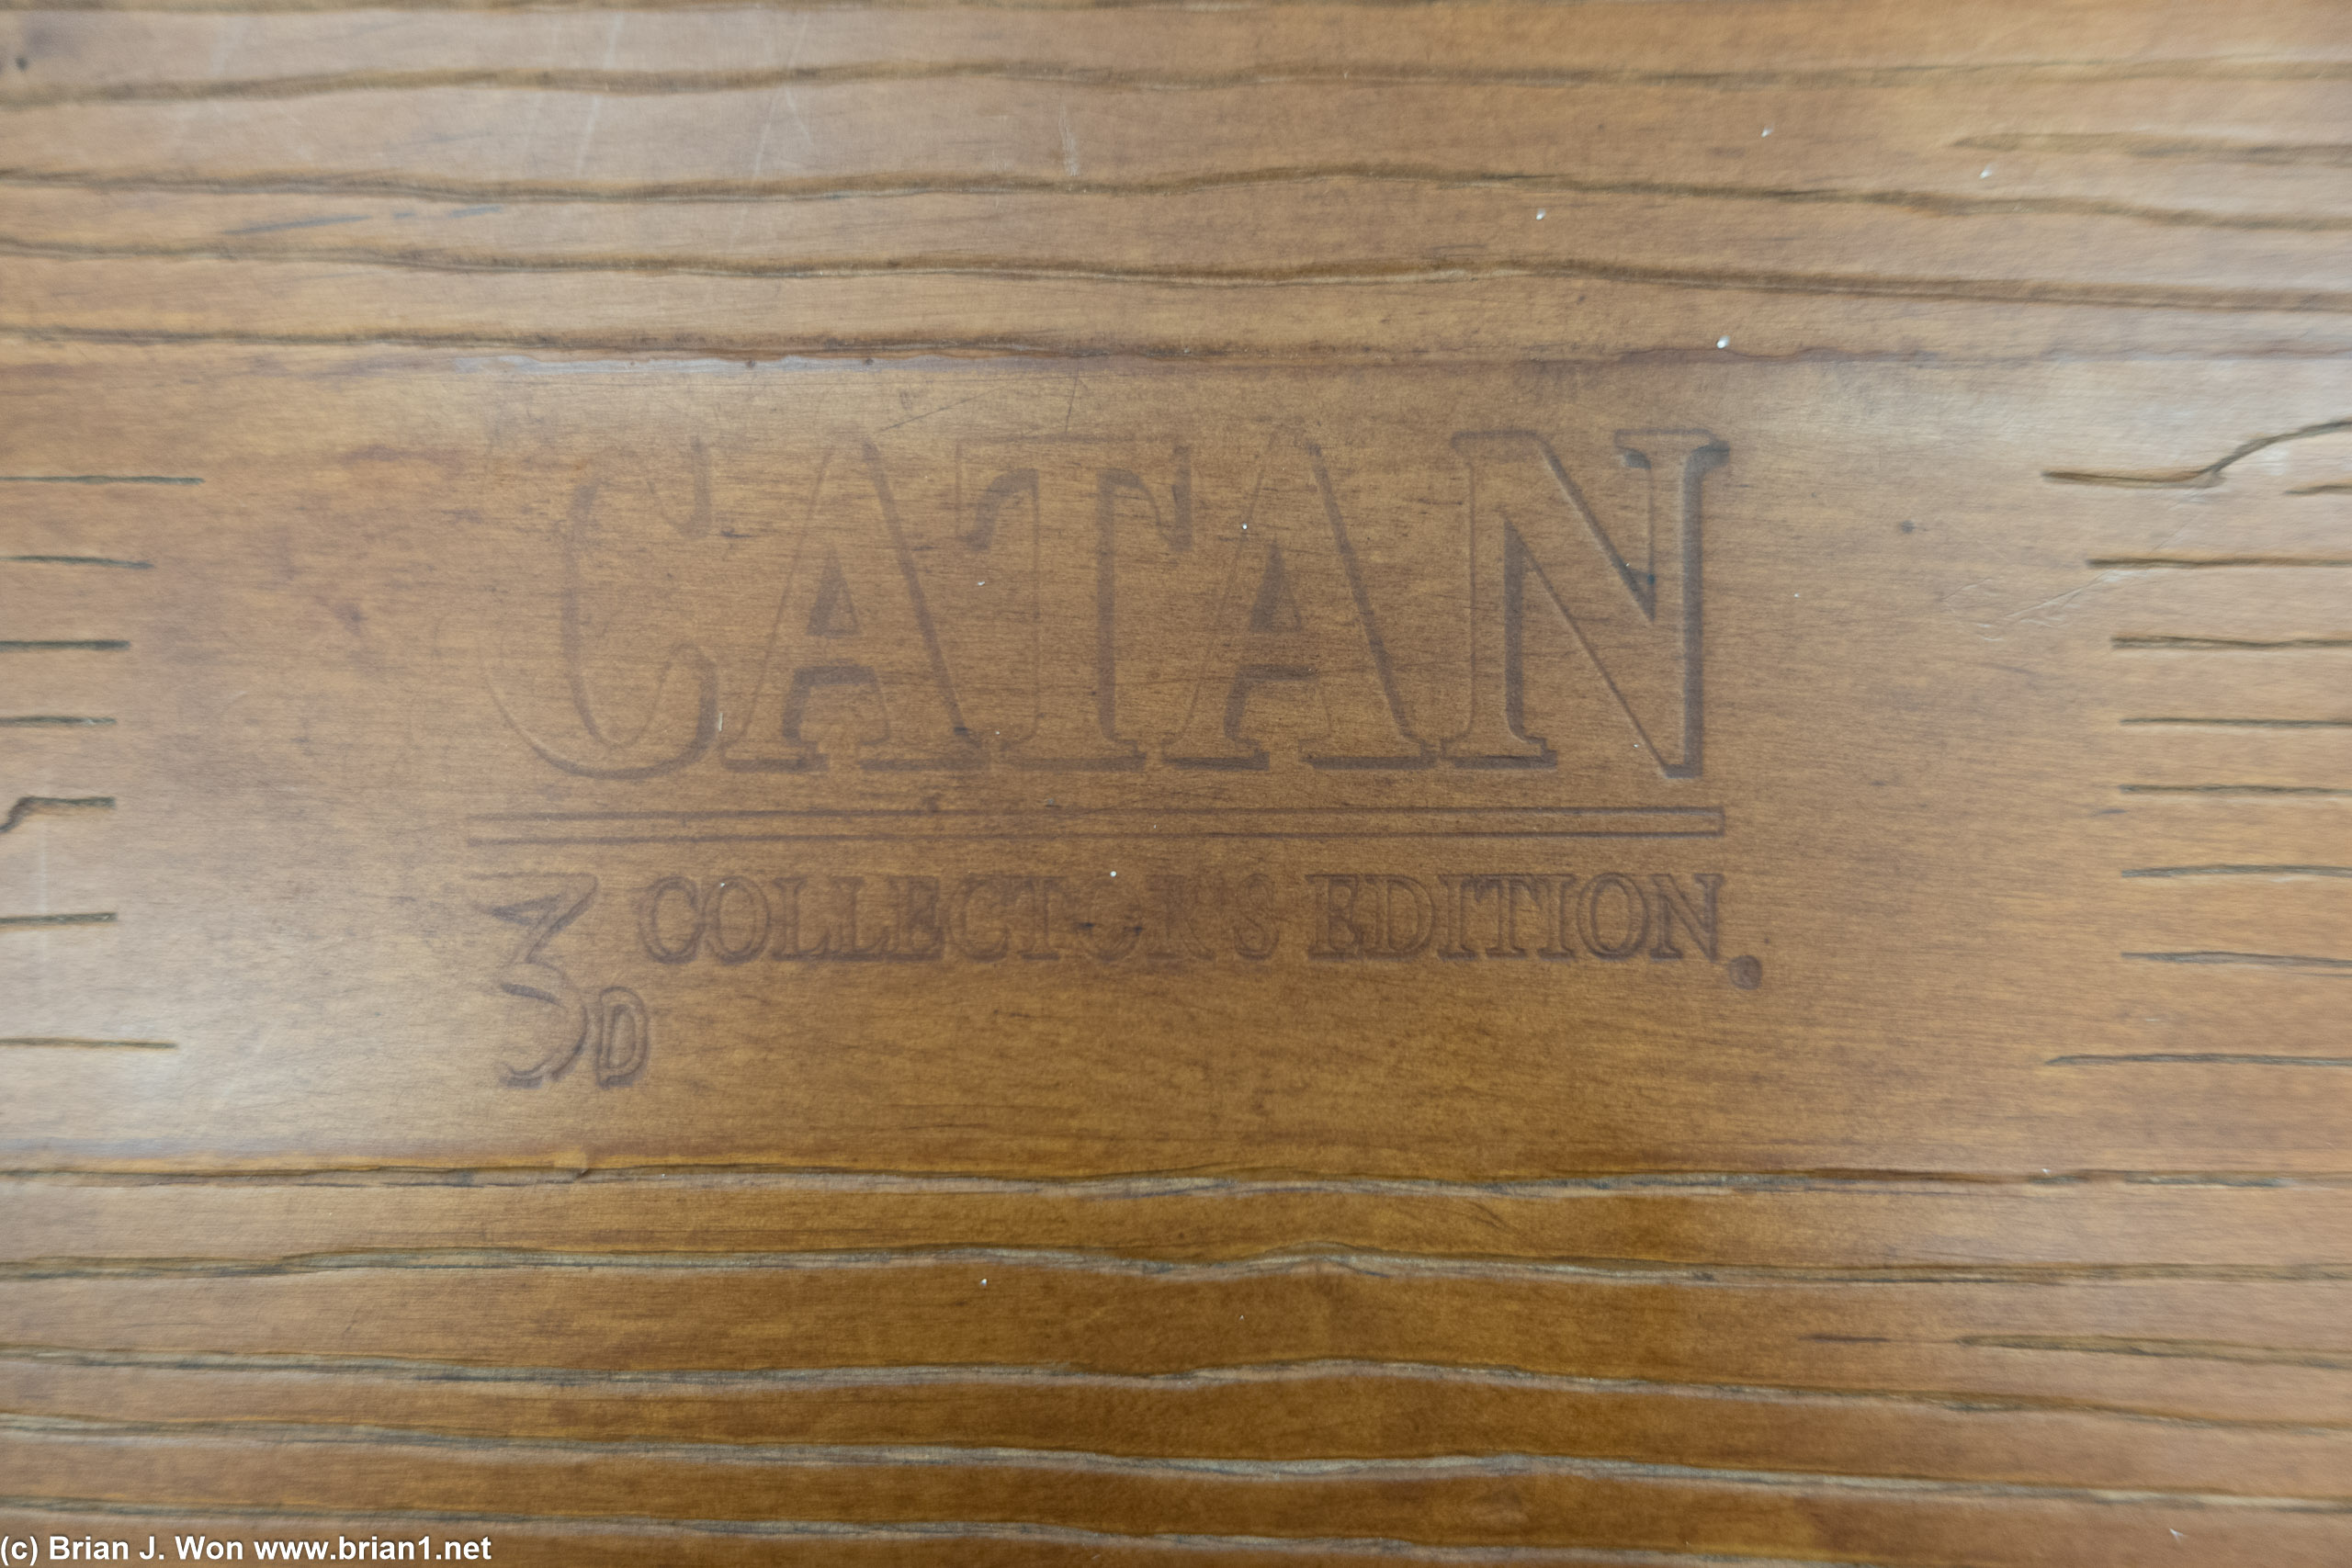 The limited edition Catan 3D Collectors' Edition.